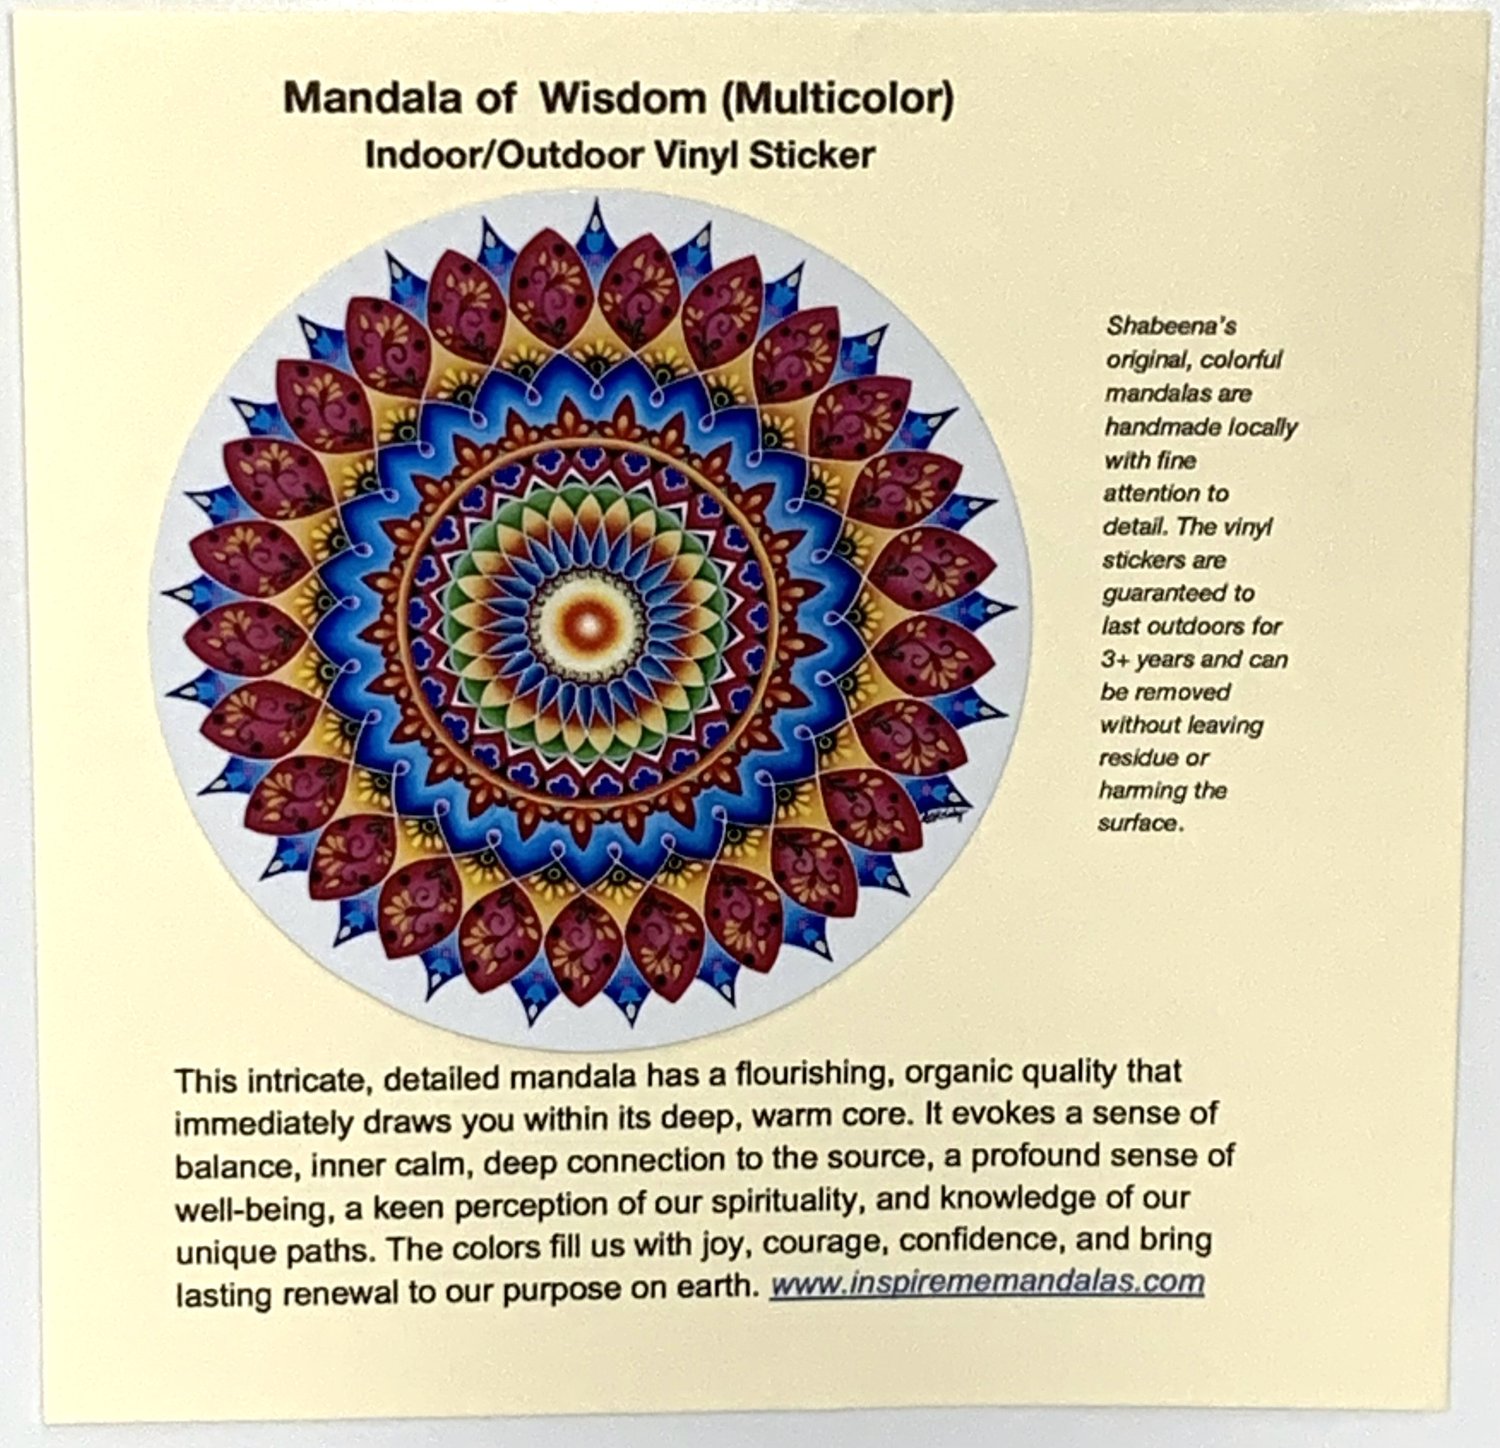 II. The Meaning and Symbolism Behind Spiritual Mandalas